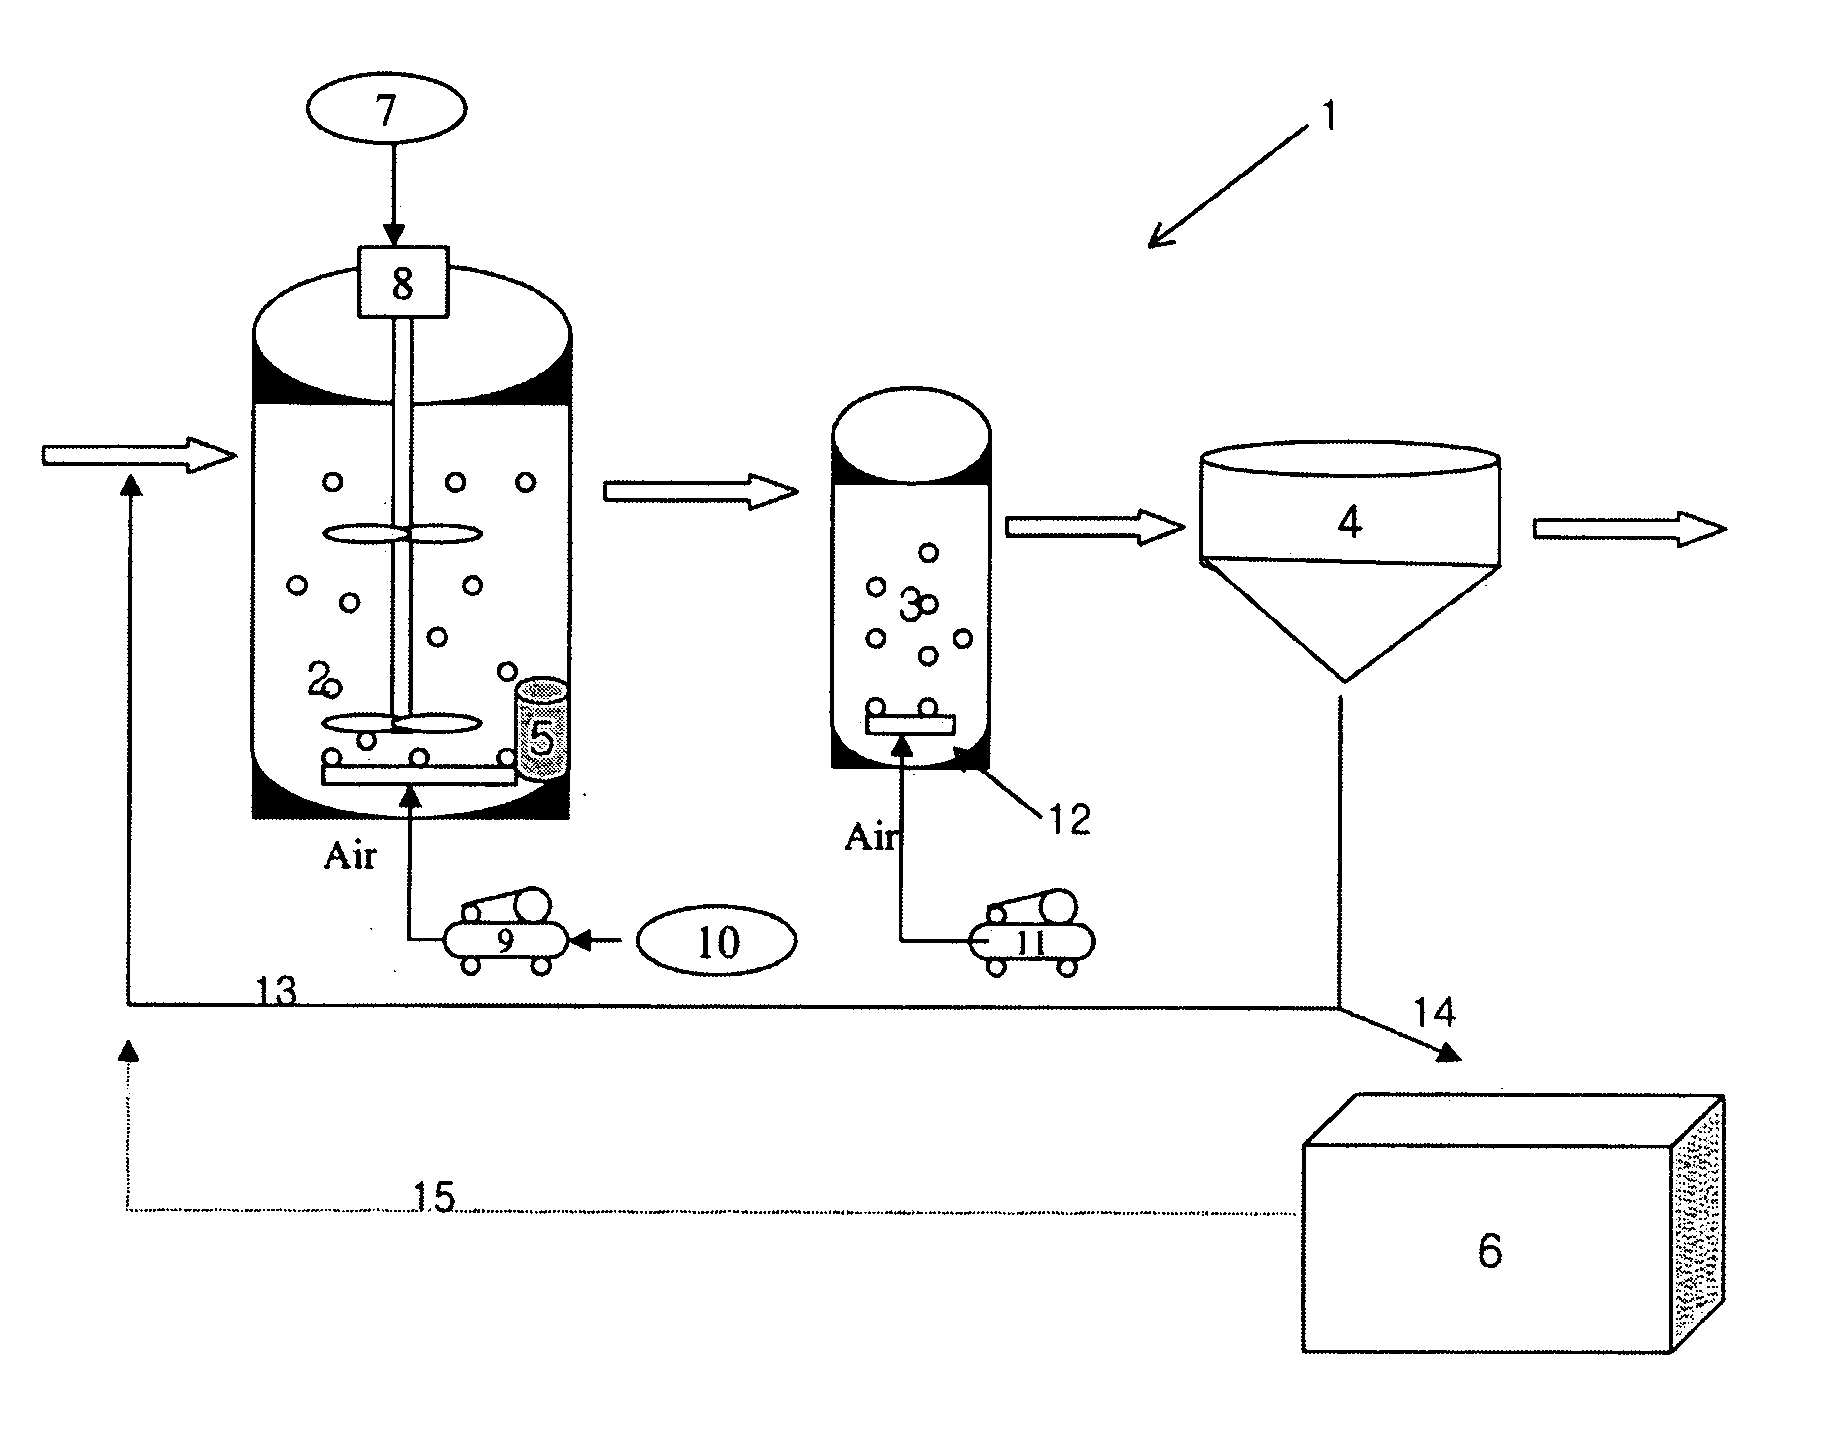 Municipal wastewater treatment apparatus and process with a continuous feed and cyclic aeration